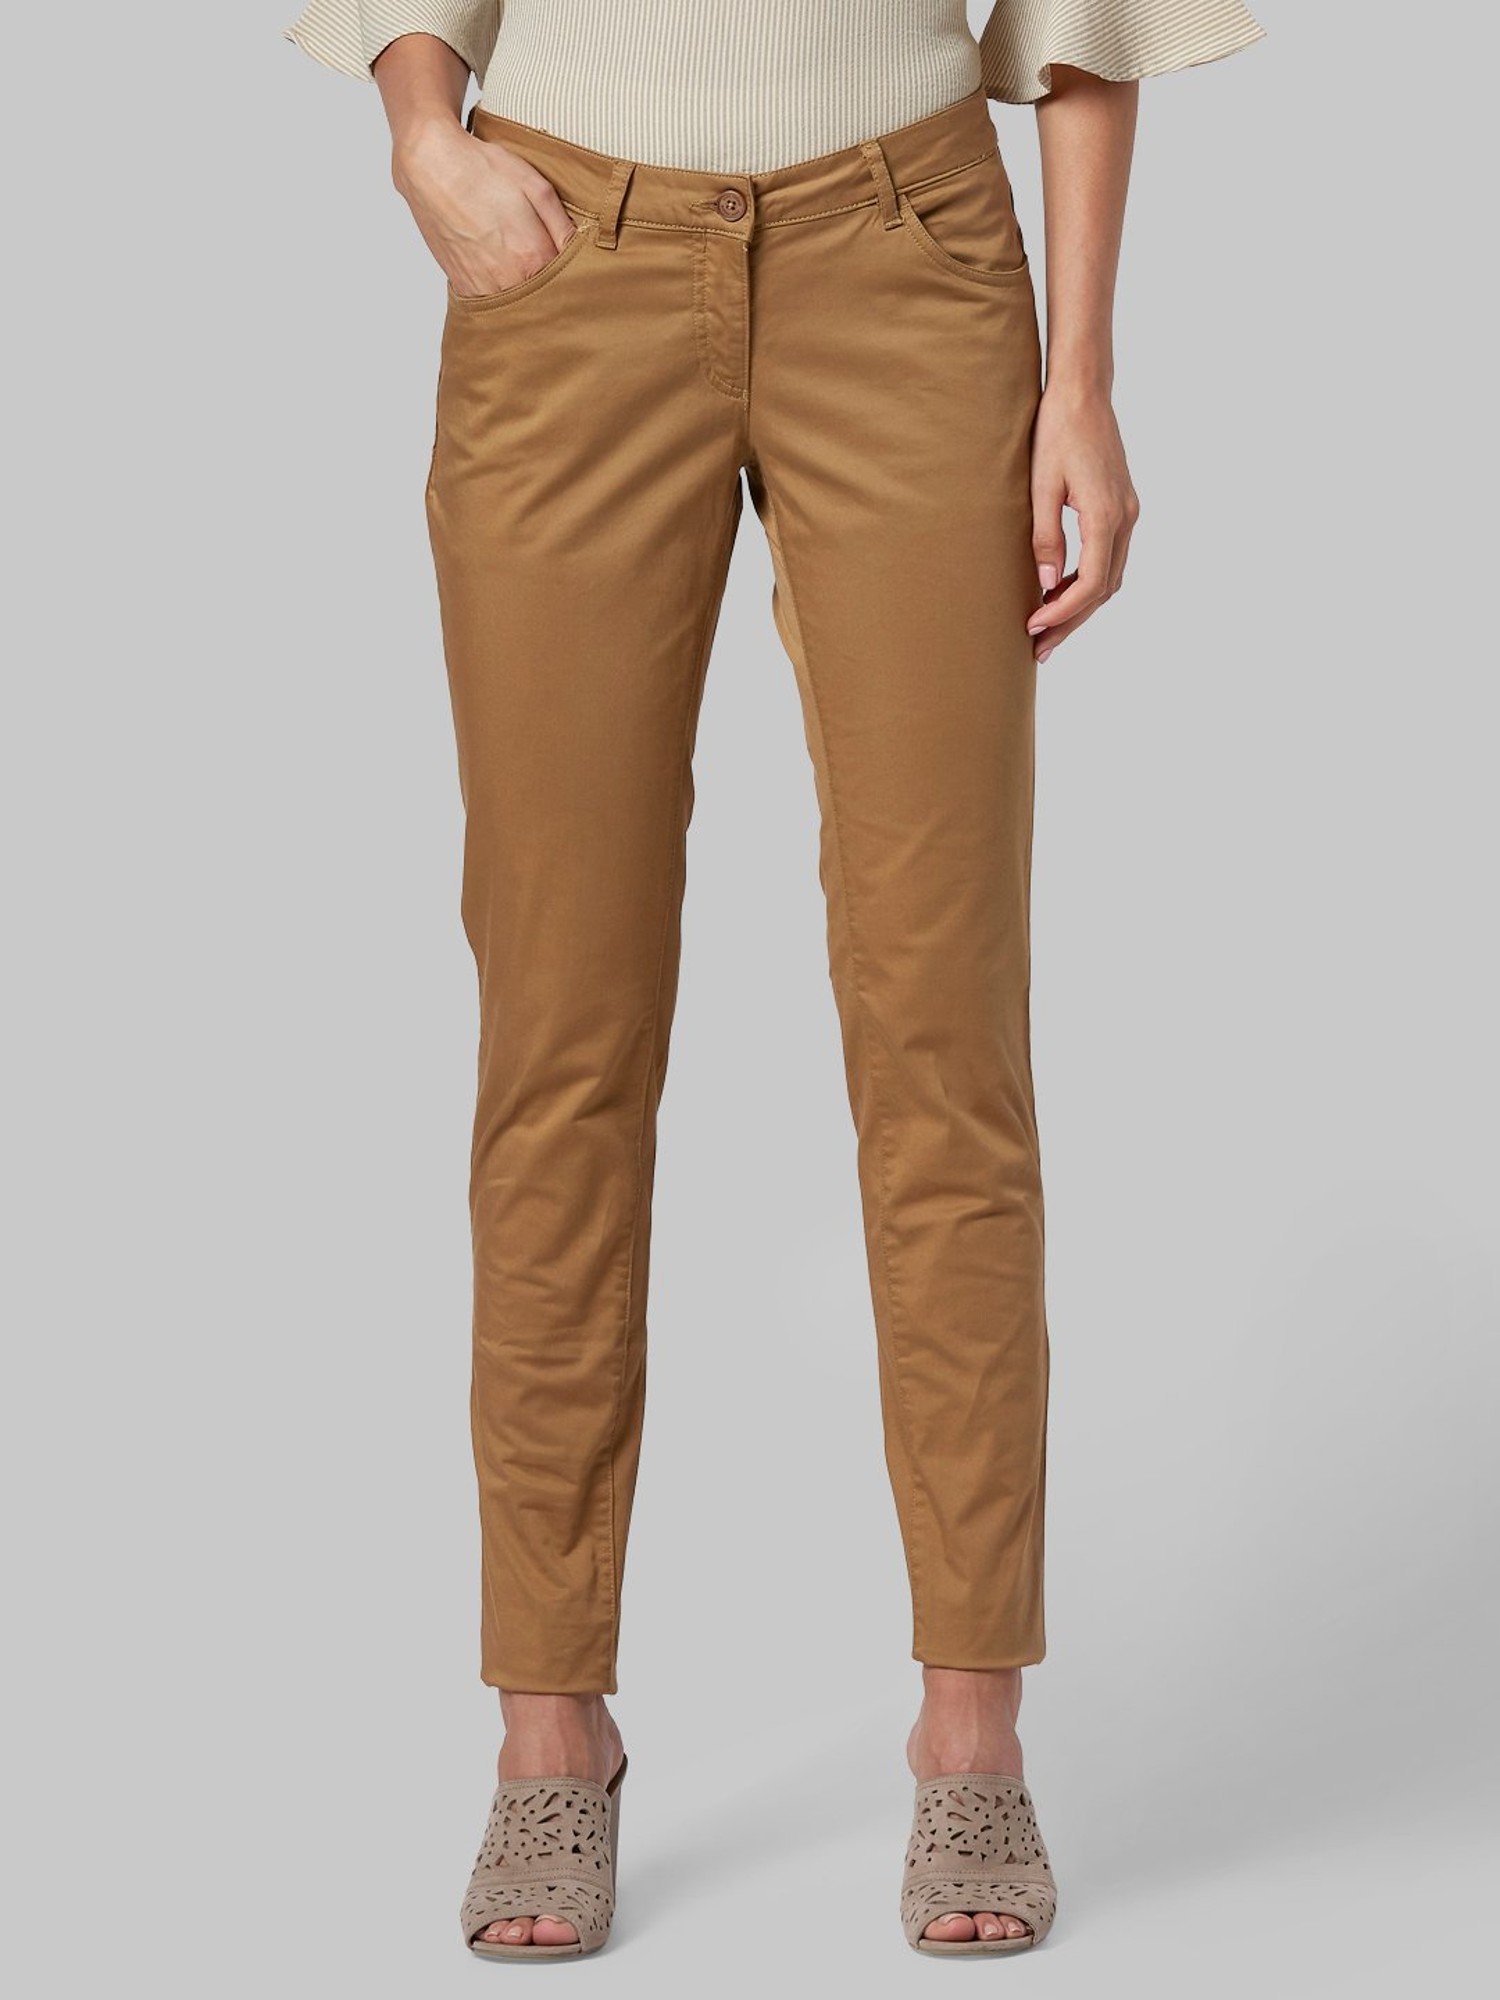 Buy NTX Women Cotton Flex Ankle Length Trouser Pants Side Chain Closer for  Casual Wear Office Wear Medium Coffee Brown at Amazonin